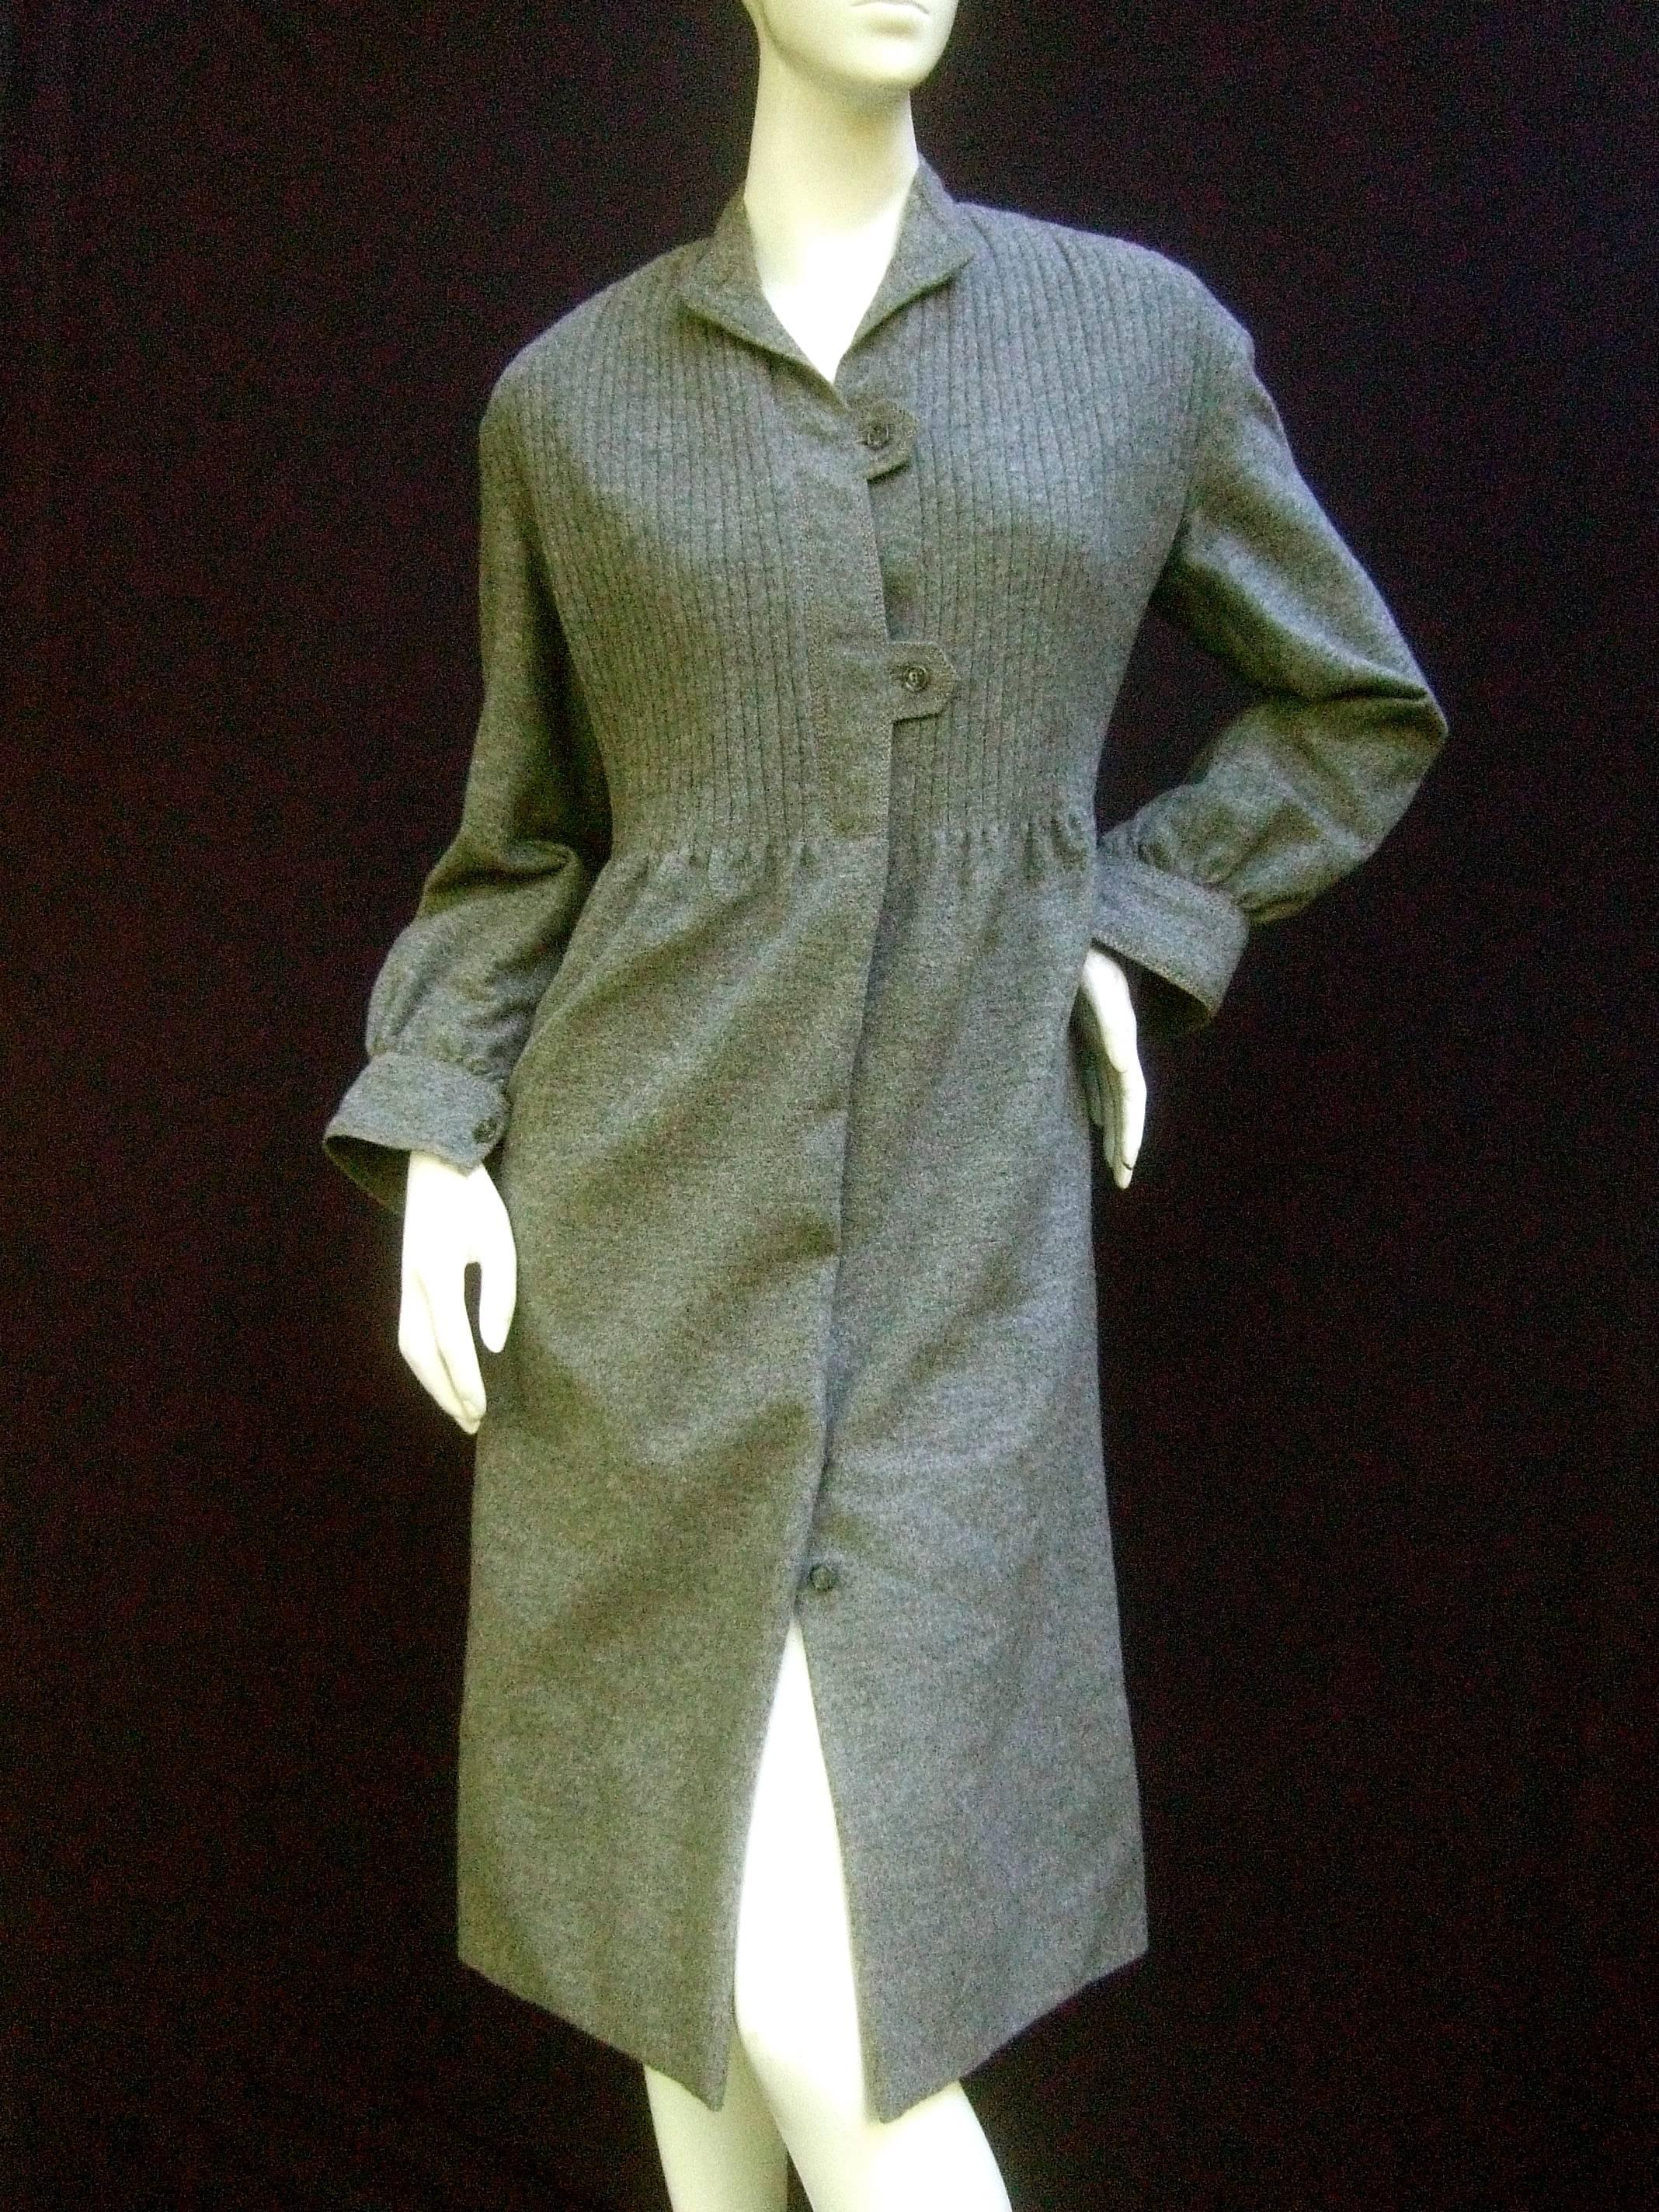 Galanos Luxurious gray flannel coat dress c 1970
The soft plush flannel wool dress is designed 
with subtle vertical ribbed detail across the 
bodice

Accented with a series of small gray lucite
buttons that run down the center front 
Partially